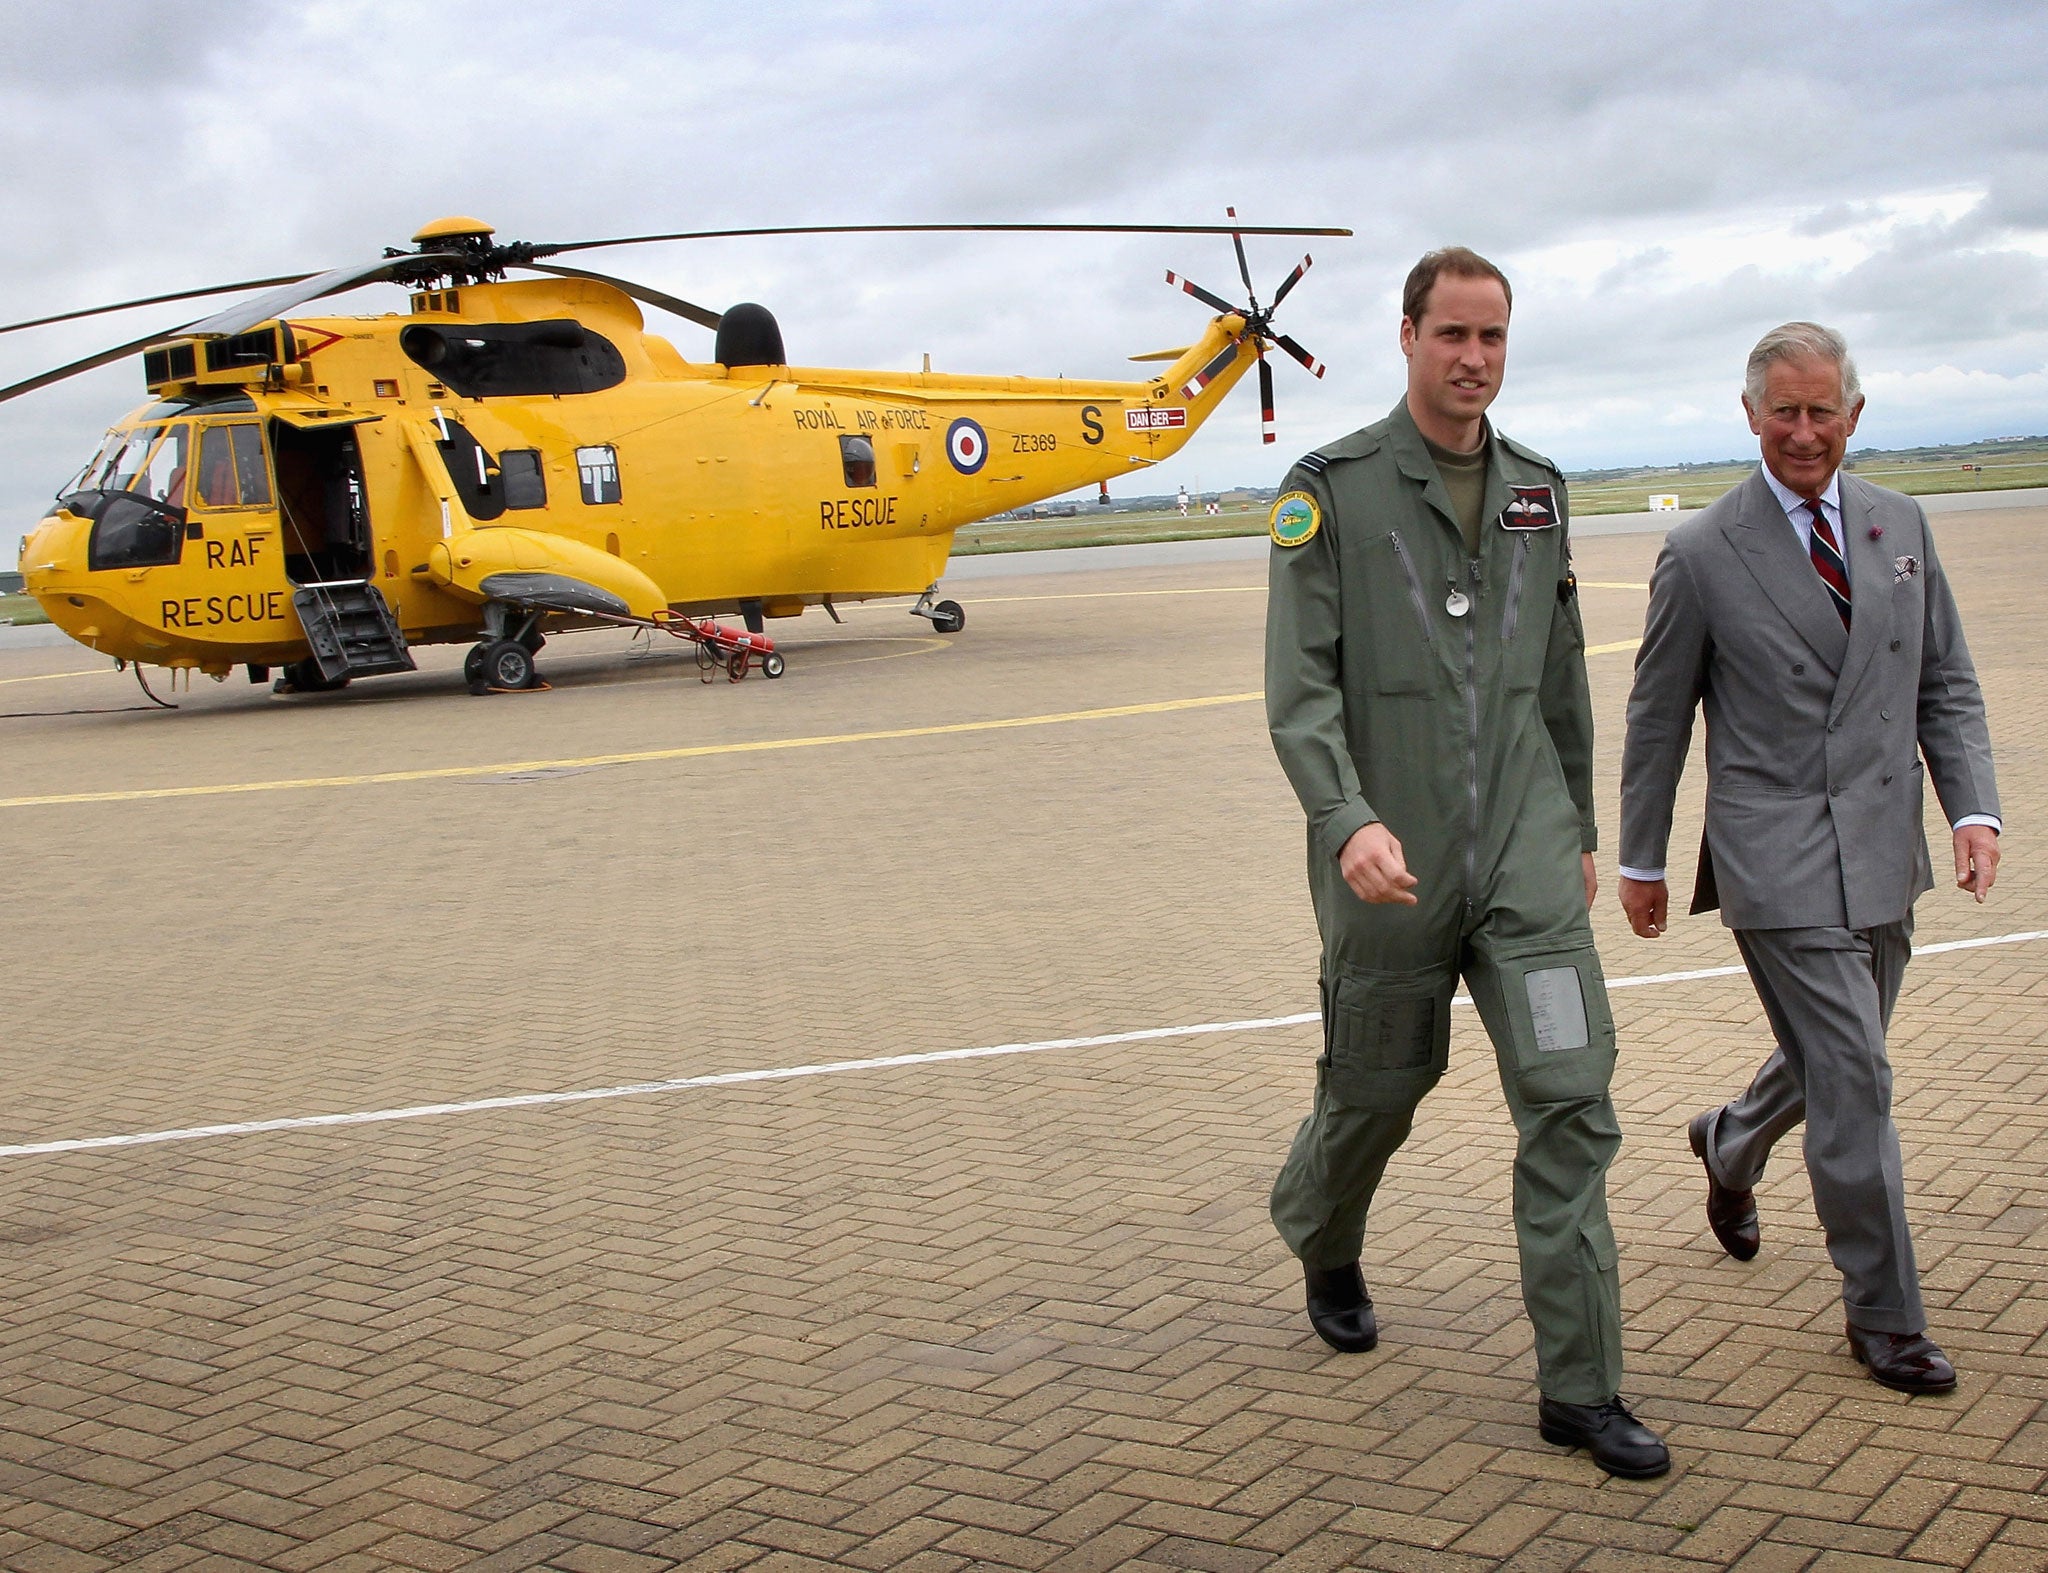 Prince William will leave the RAF